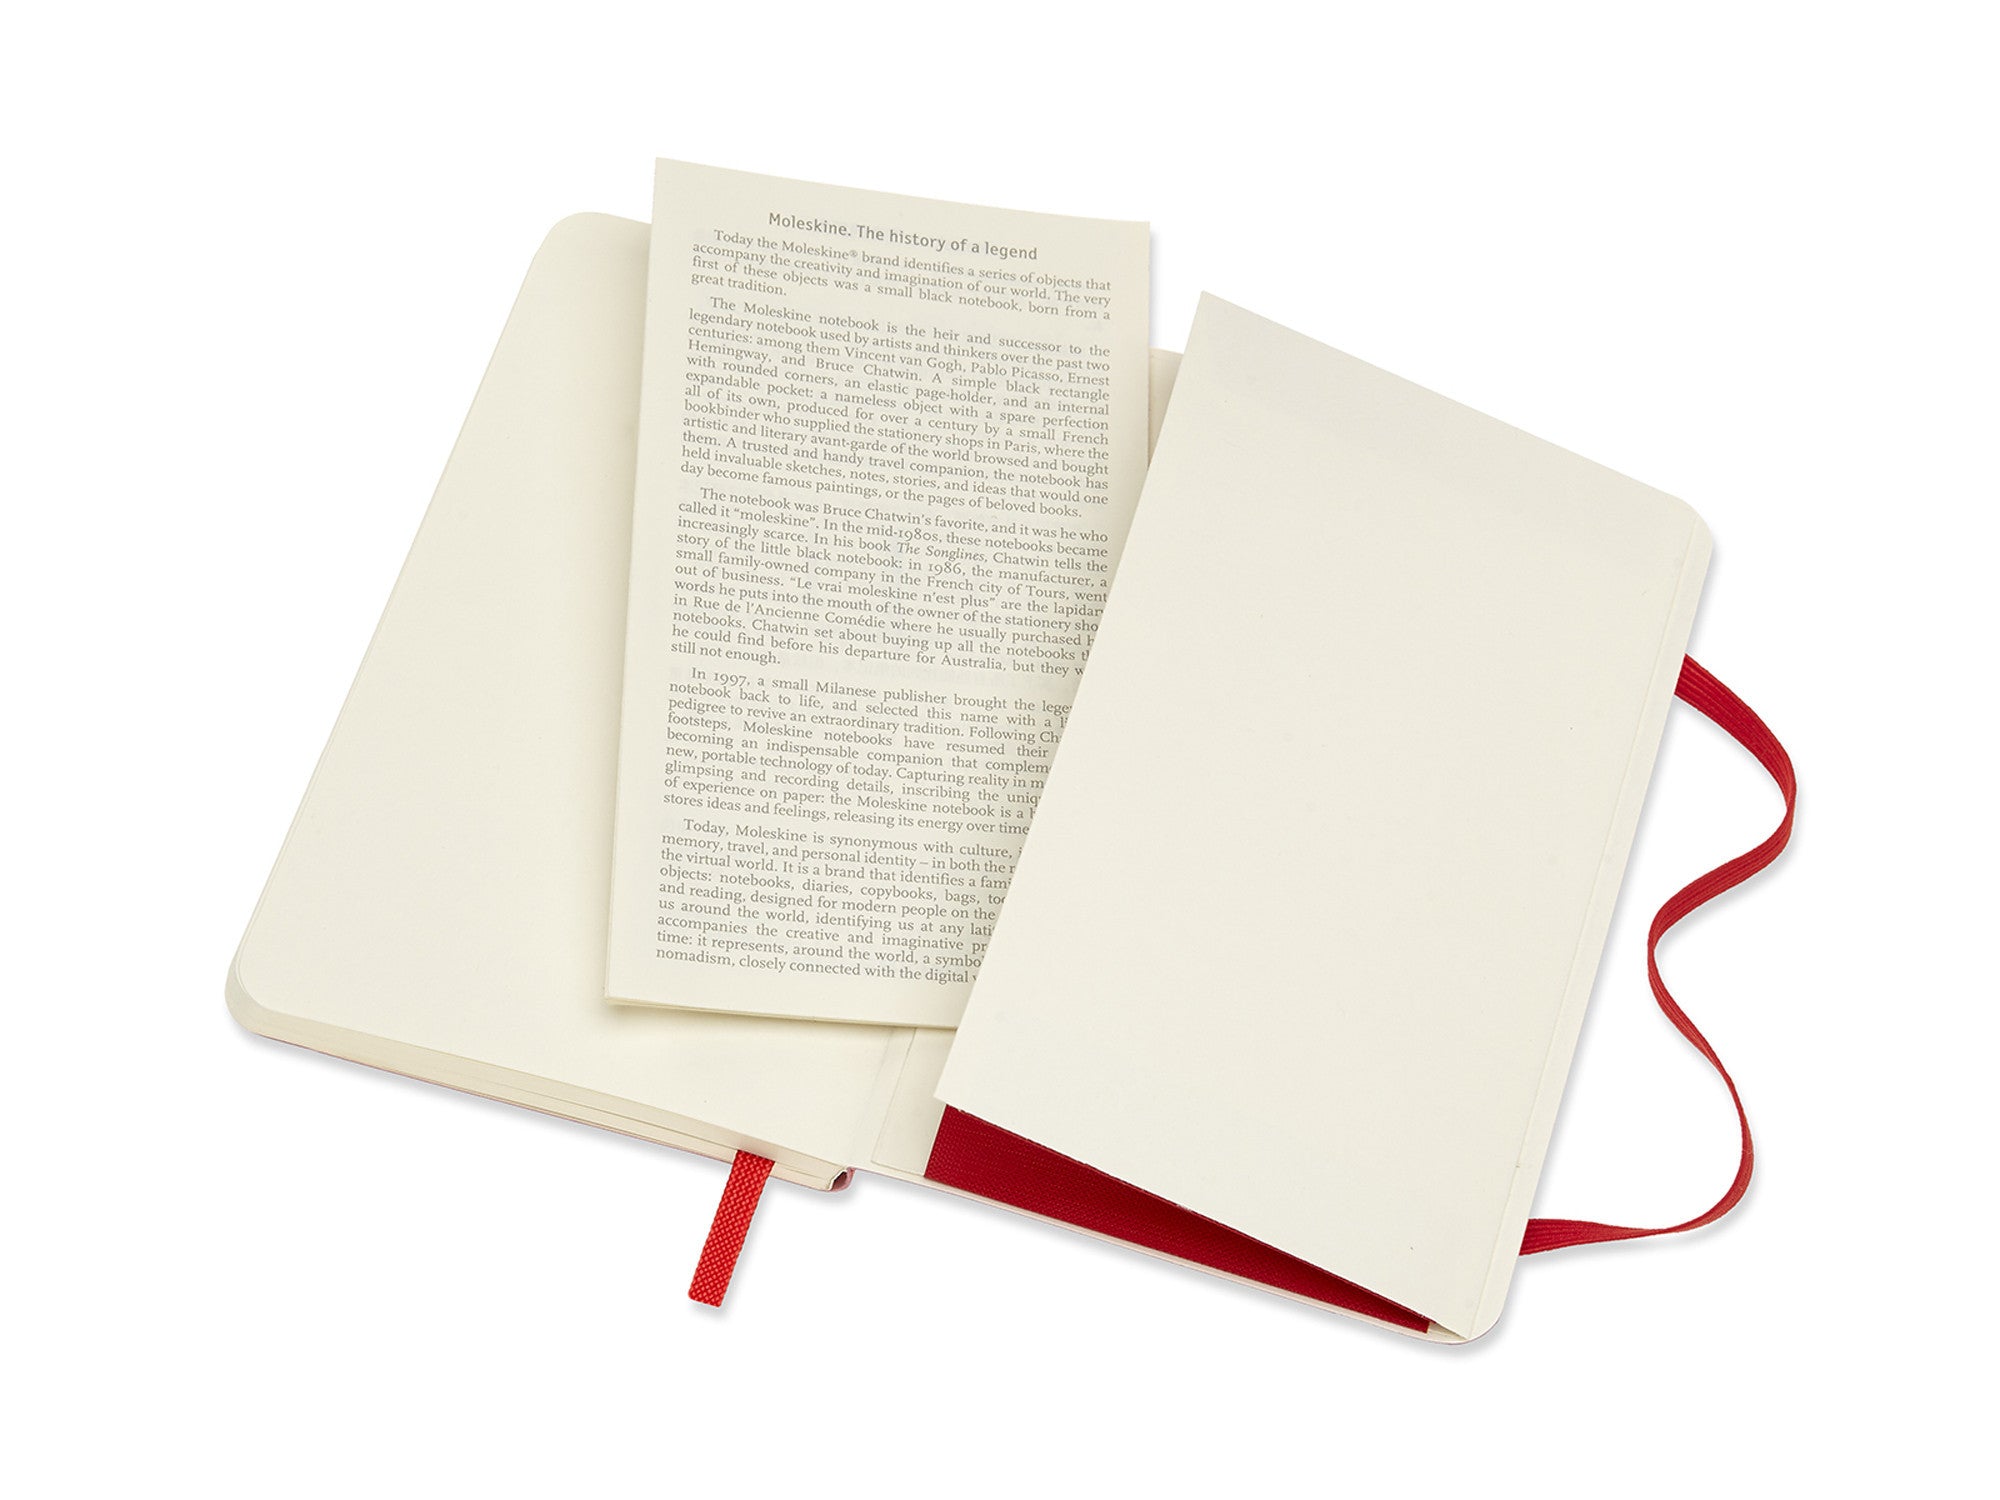 Moleskine notebook softcover large plain red